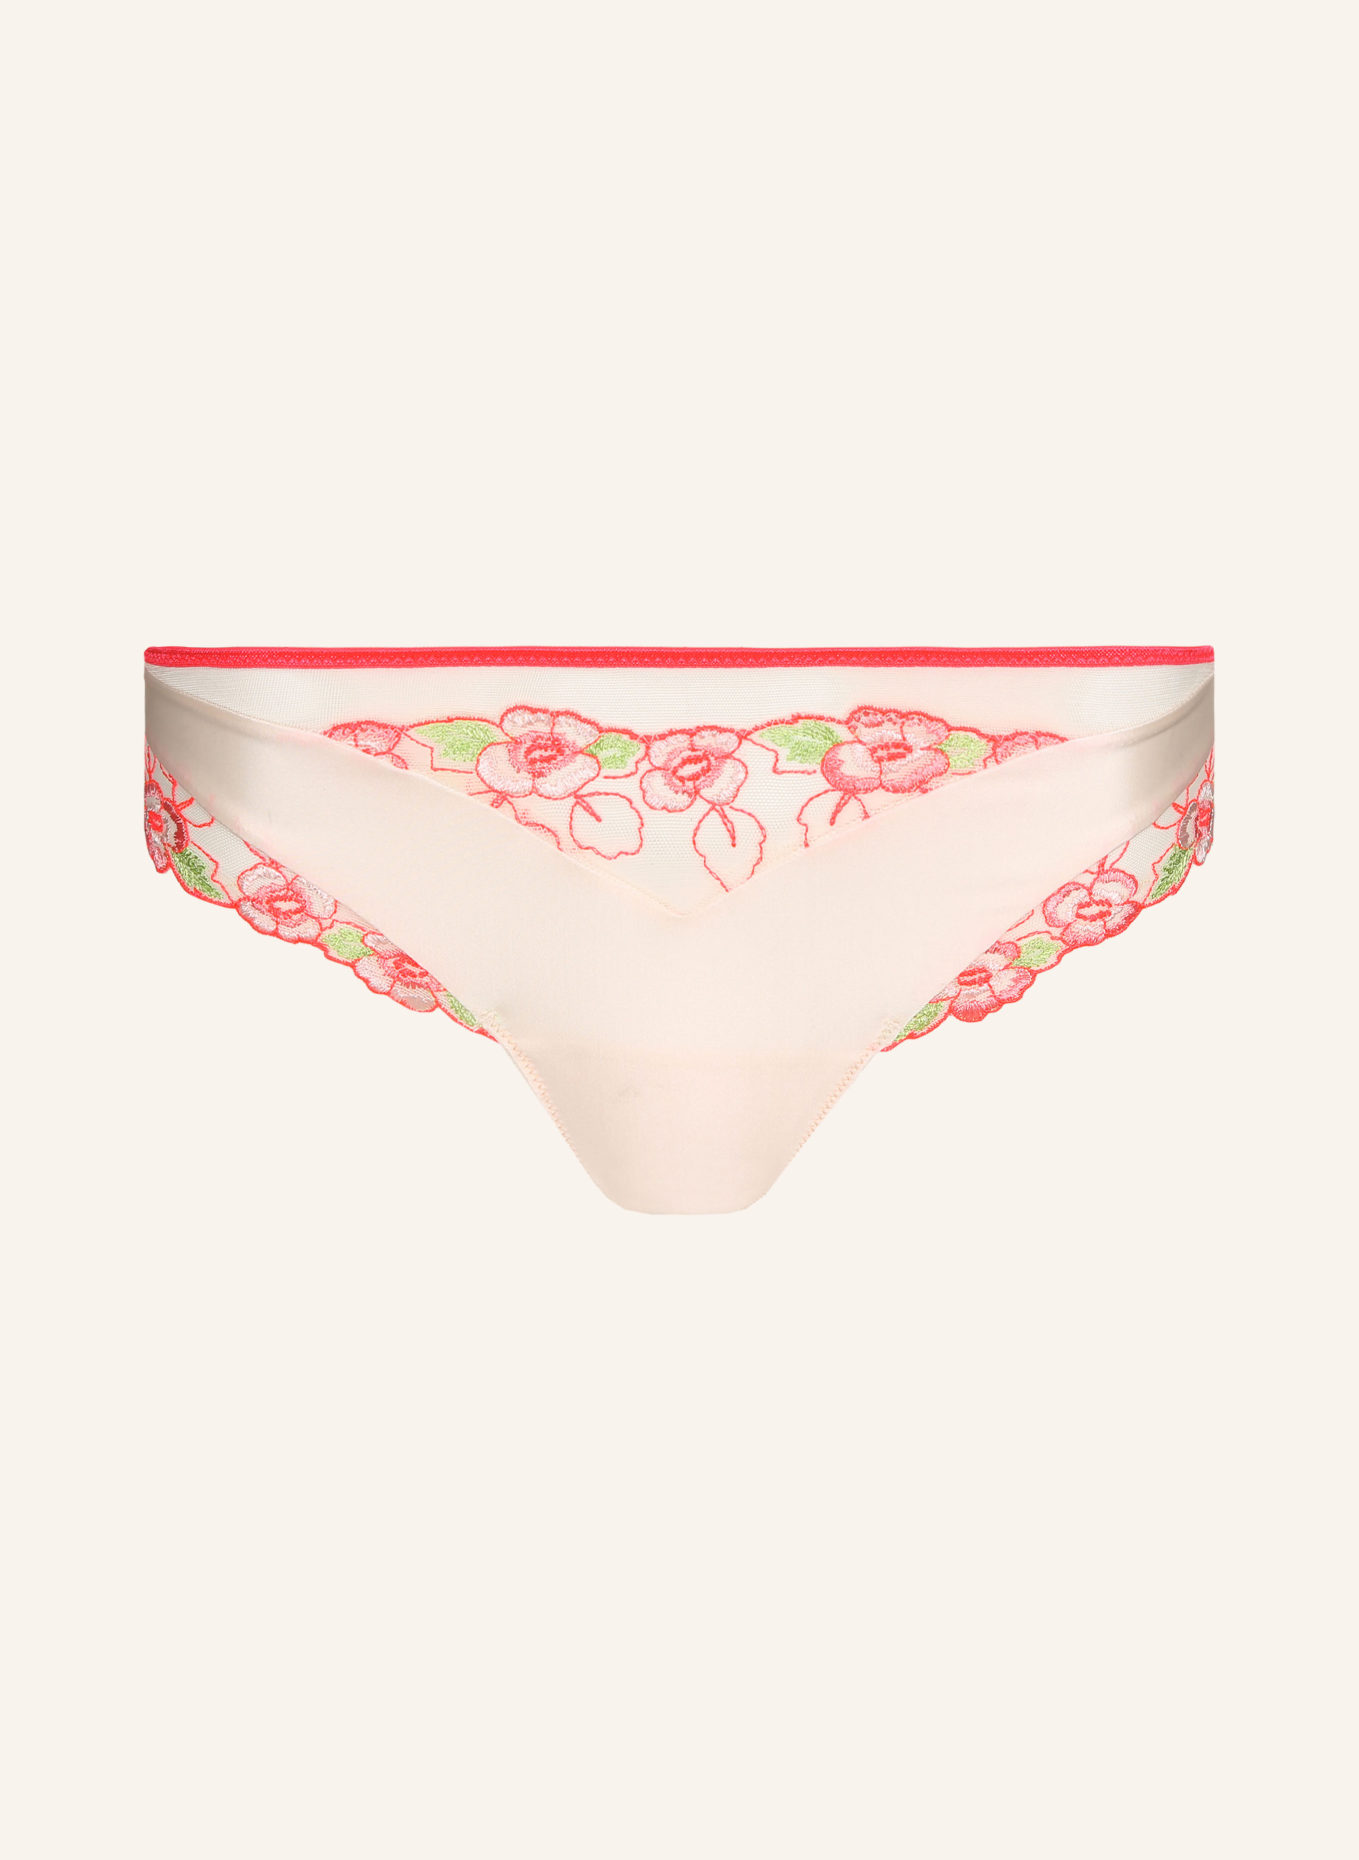 MARIE JO Briefs AYAMA, Color: NEON RED/ LIGHT GREEN/ CREAM (Image 1)